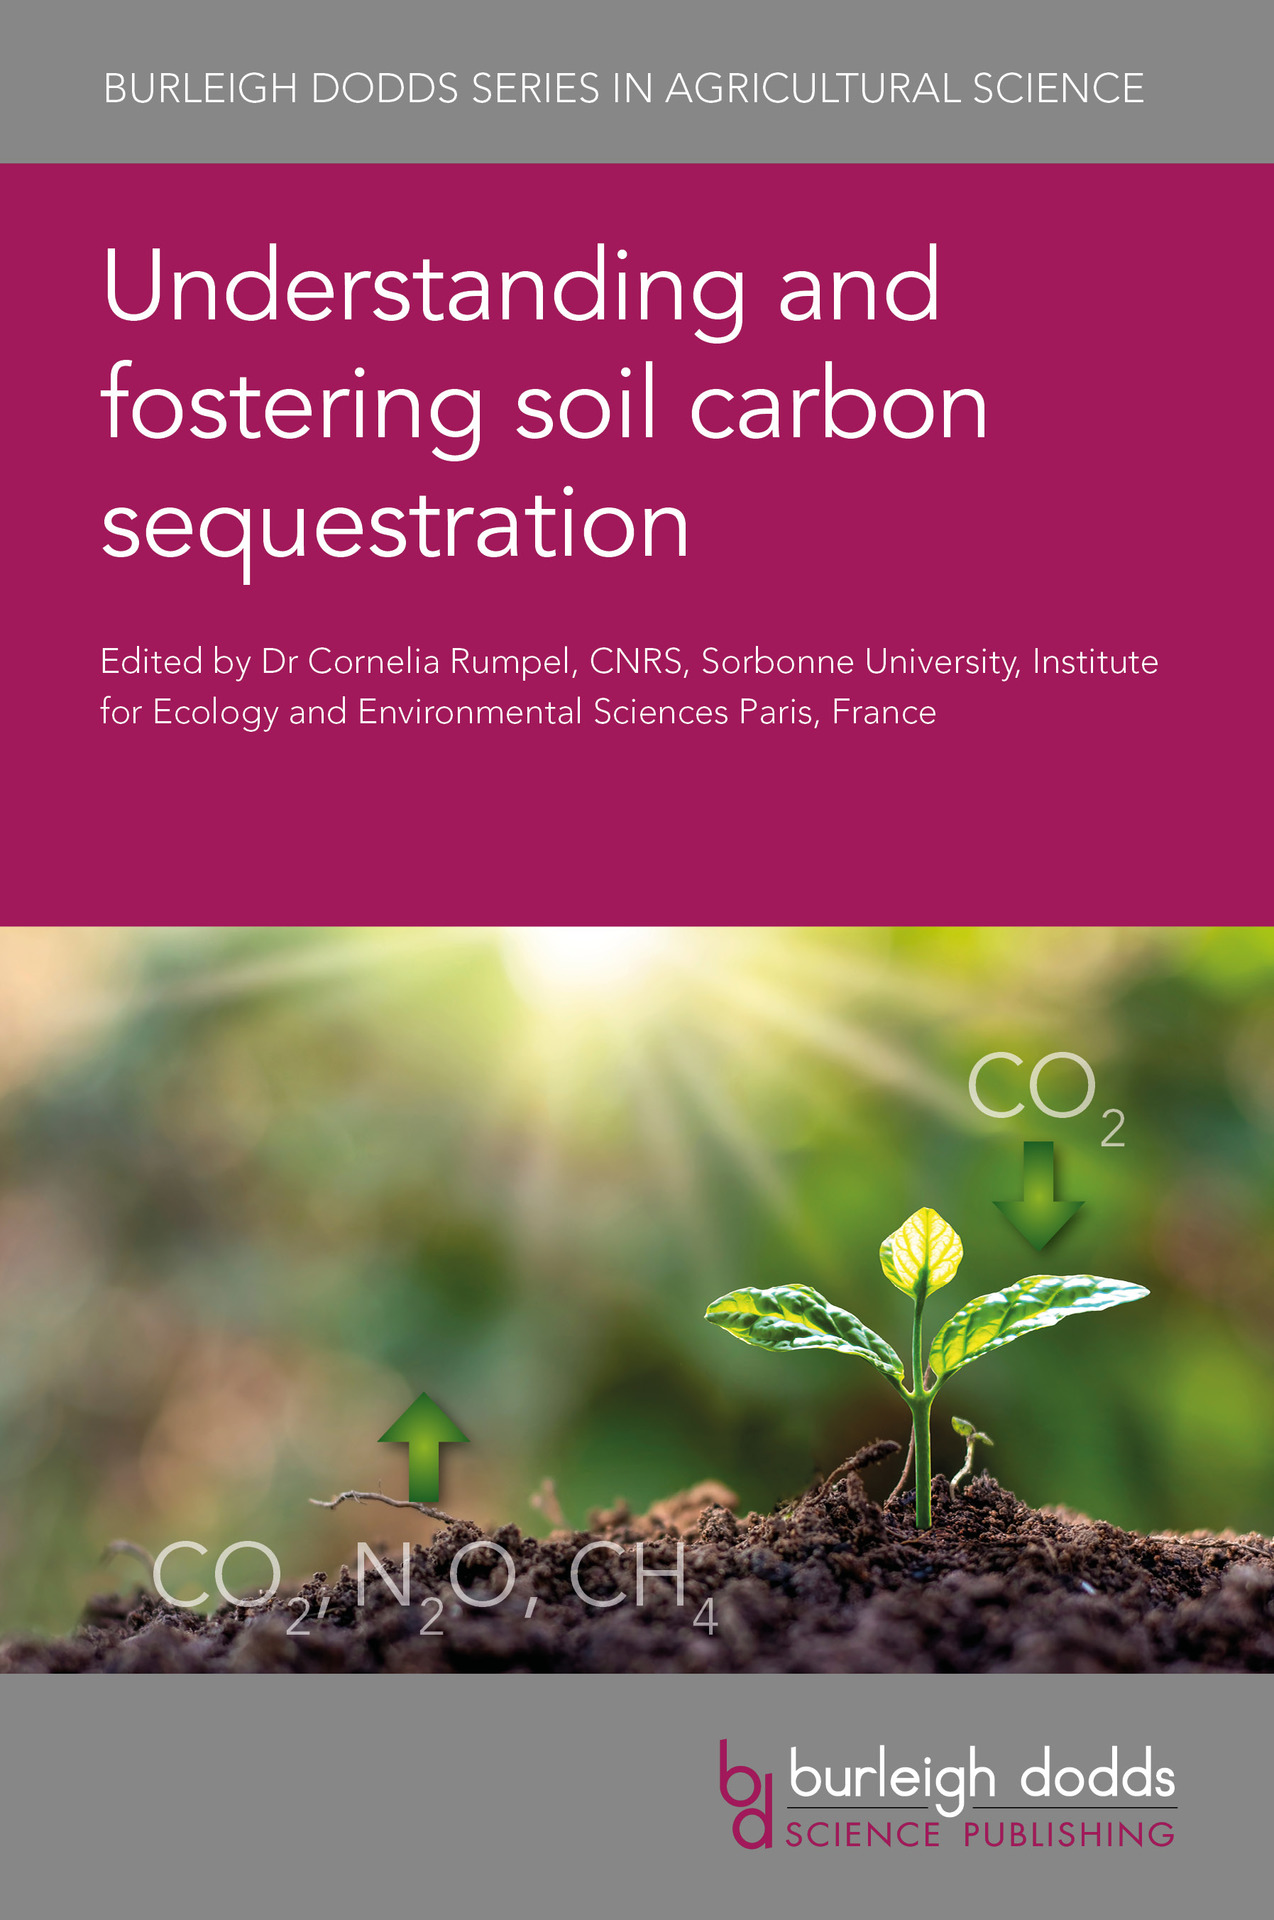 Book cover image - Understanding and fostering soil carbon sequestration